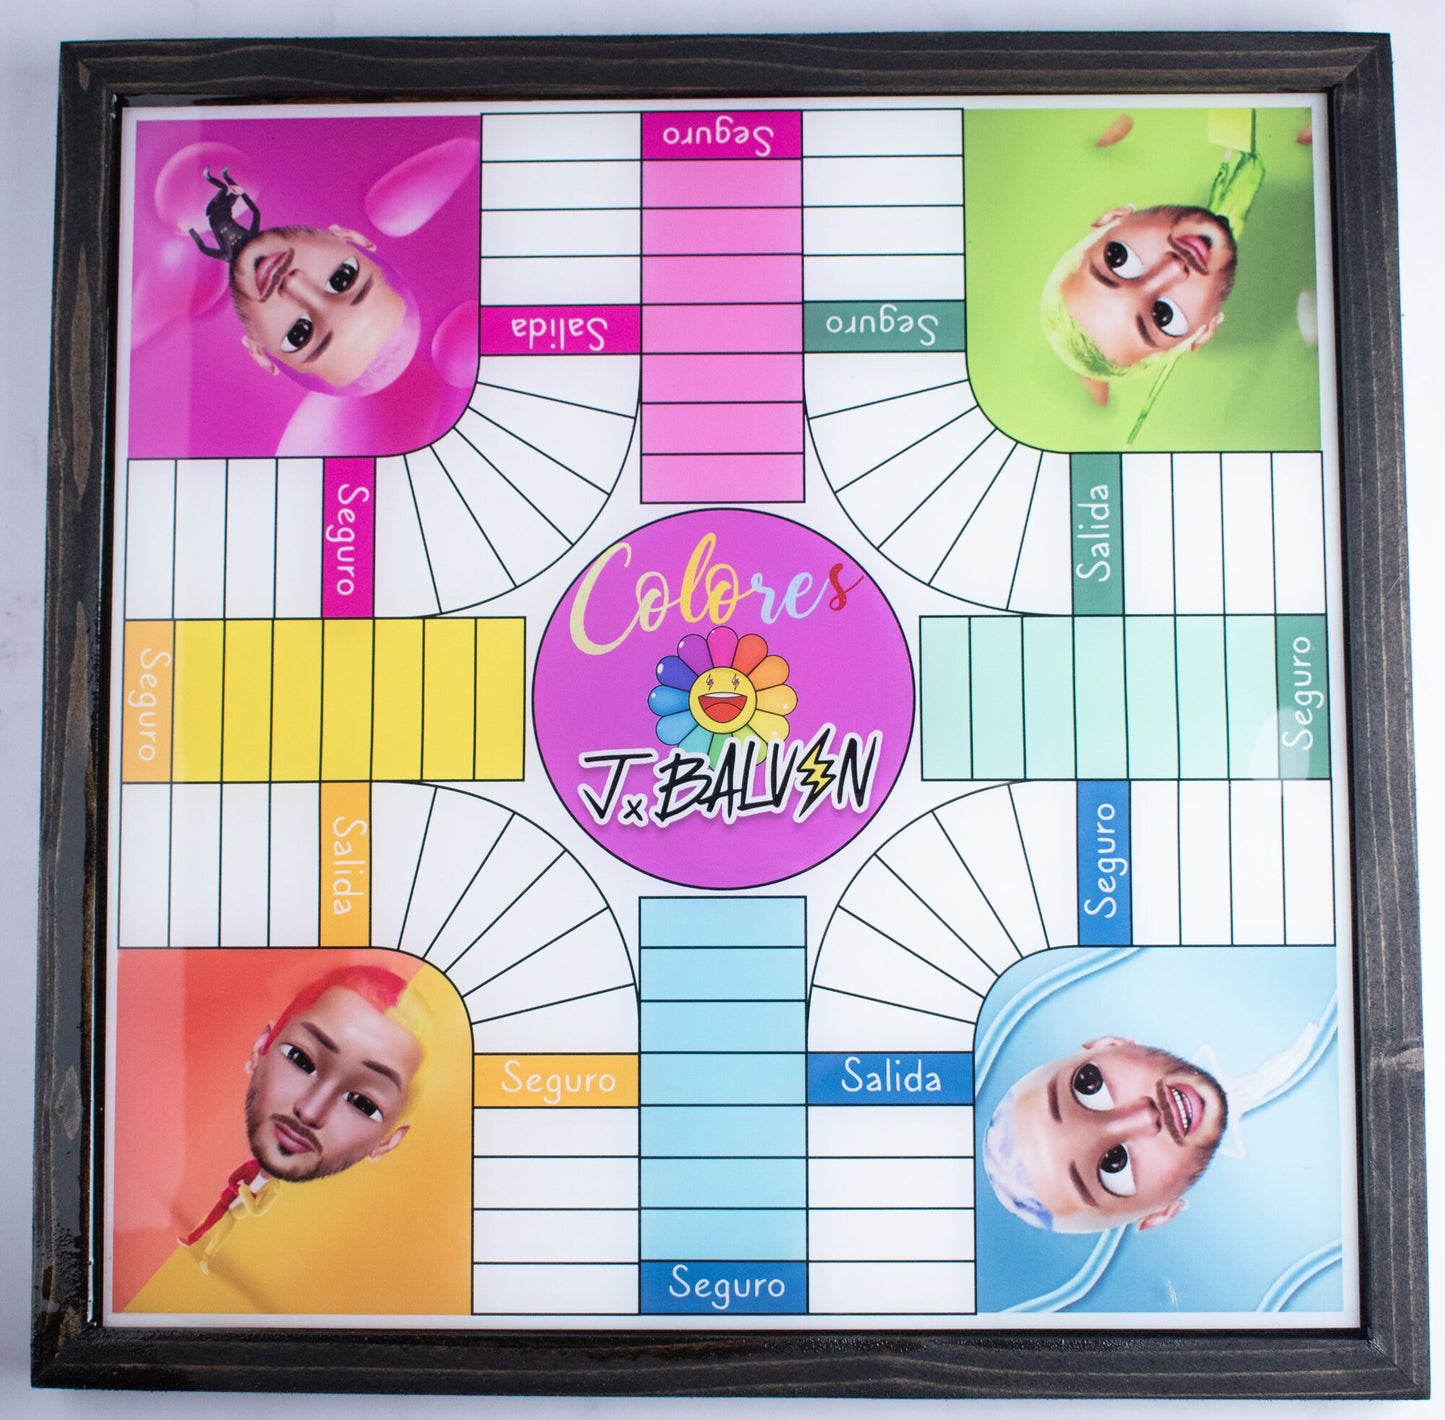 Parcheesi Board for 4 players - CUSTOM BOARD. You choose your own pictures. Hand Made with wood & Resin.